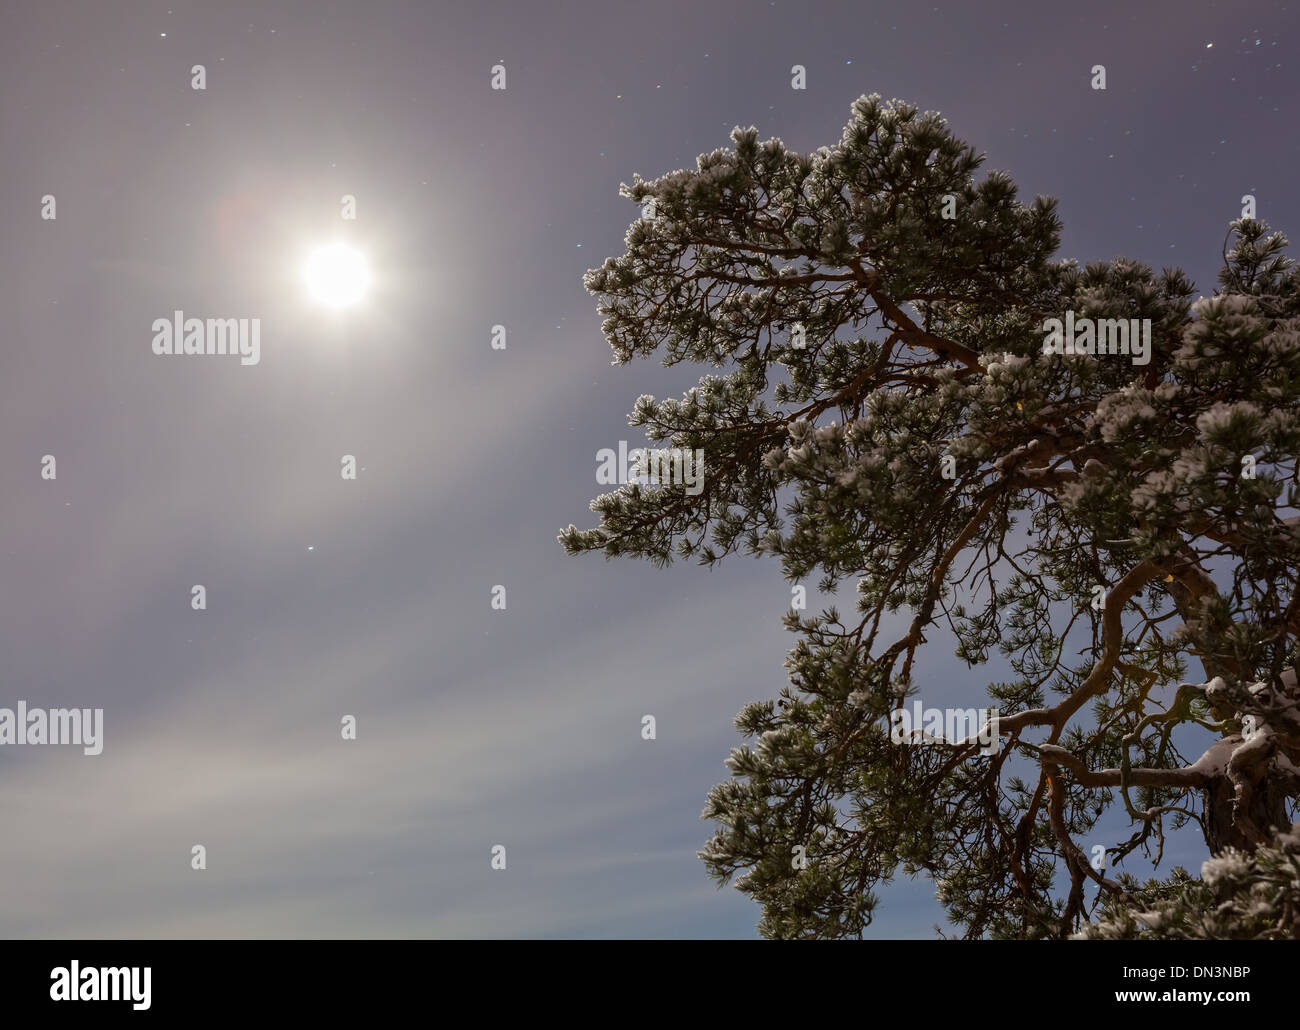 Winter forest in the moonlight Stock Photo